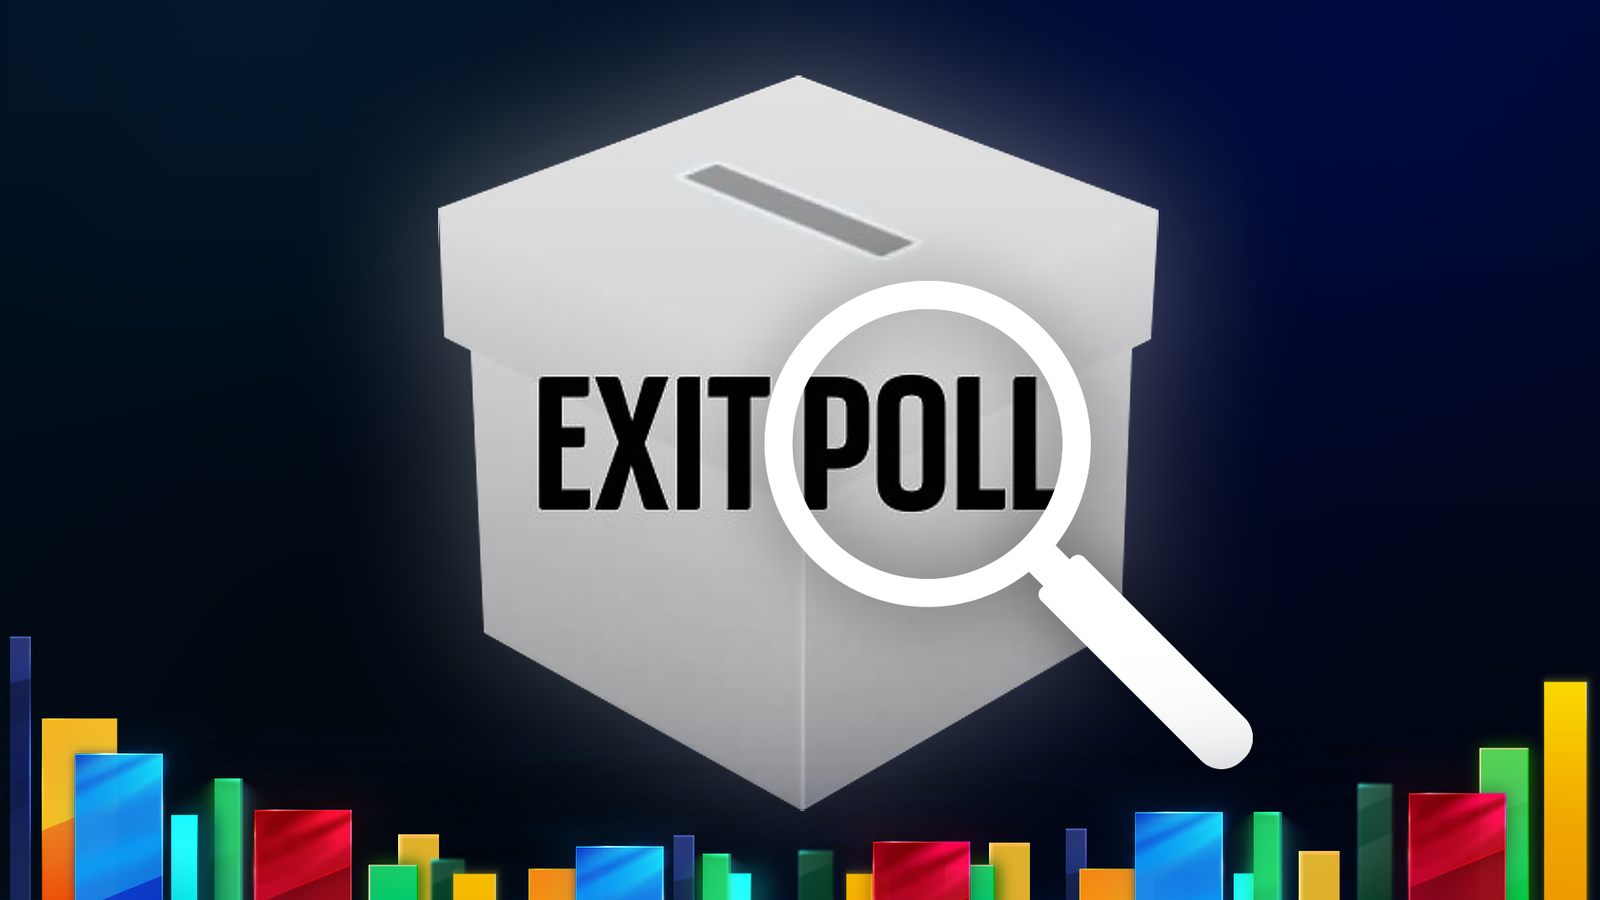 Exit poll: What is the forecast election result in my constituency?